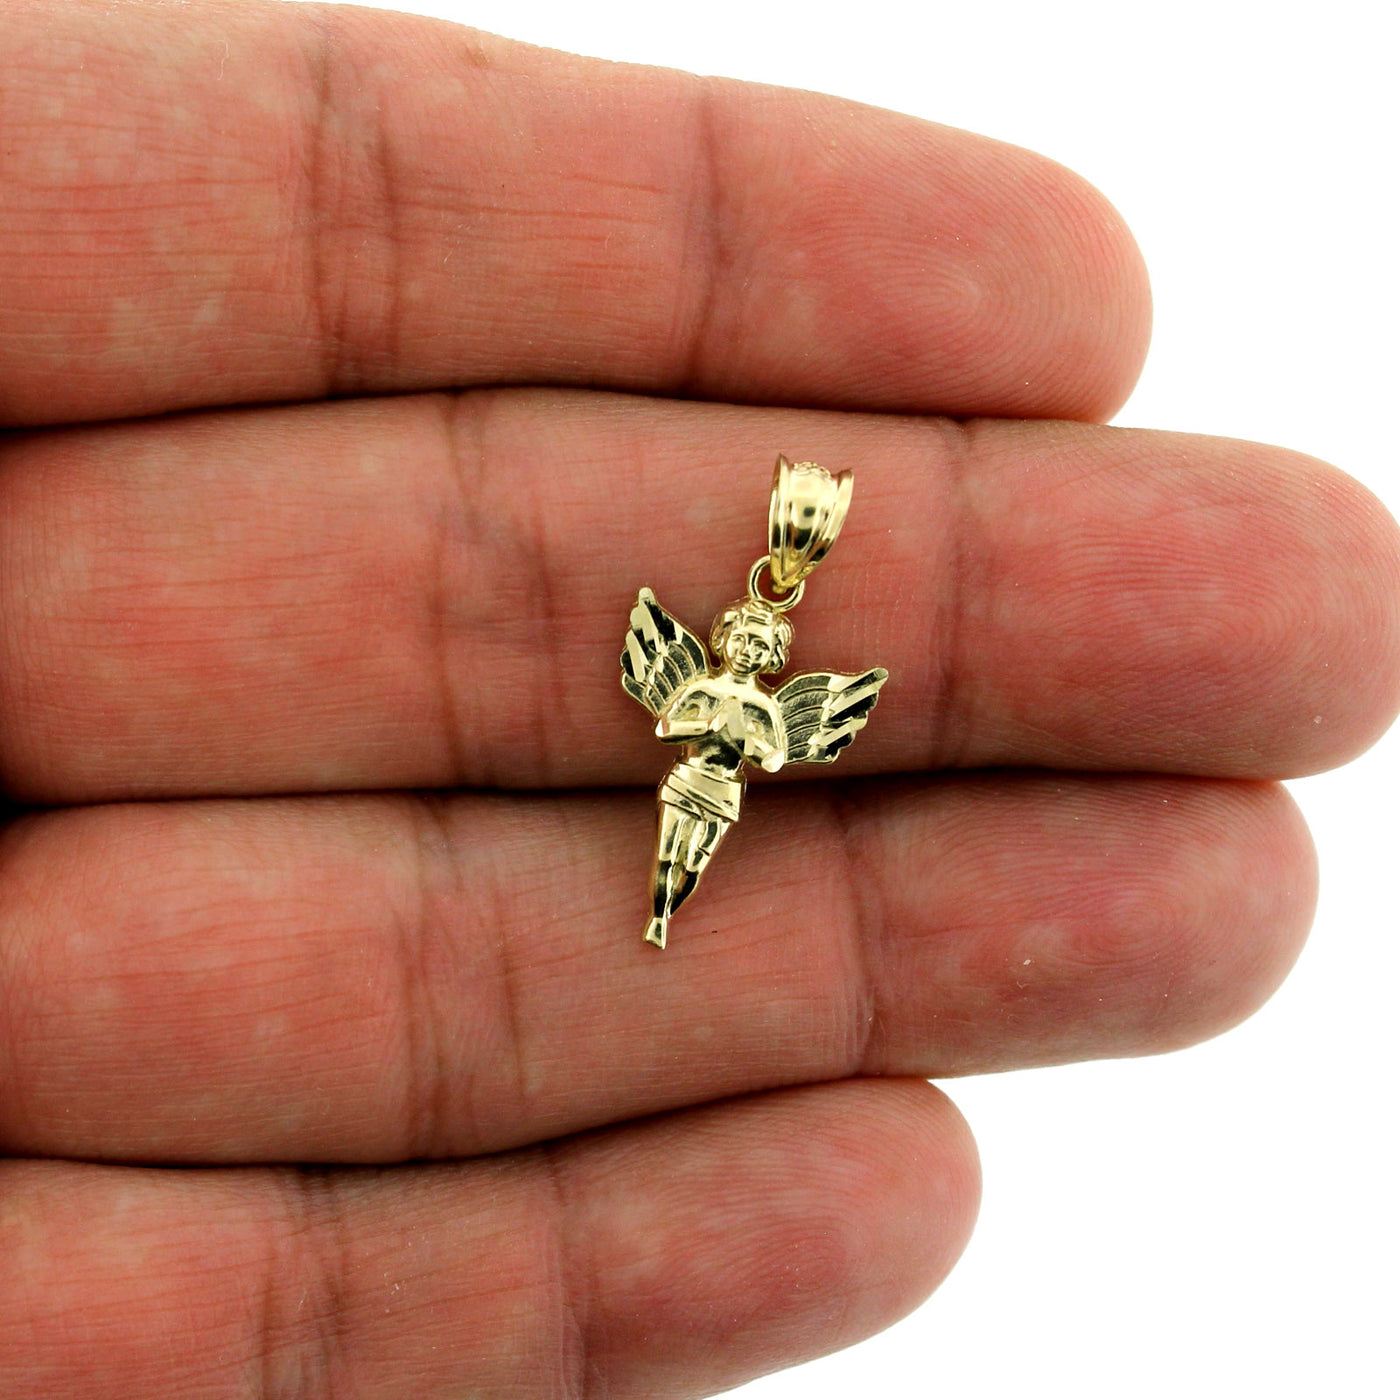 Real 10K Yellow Gold Praying Angel Charm Pendant With 2mm Rope Chain Necklace